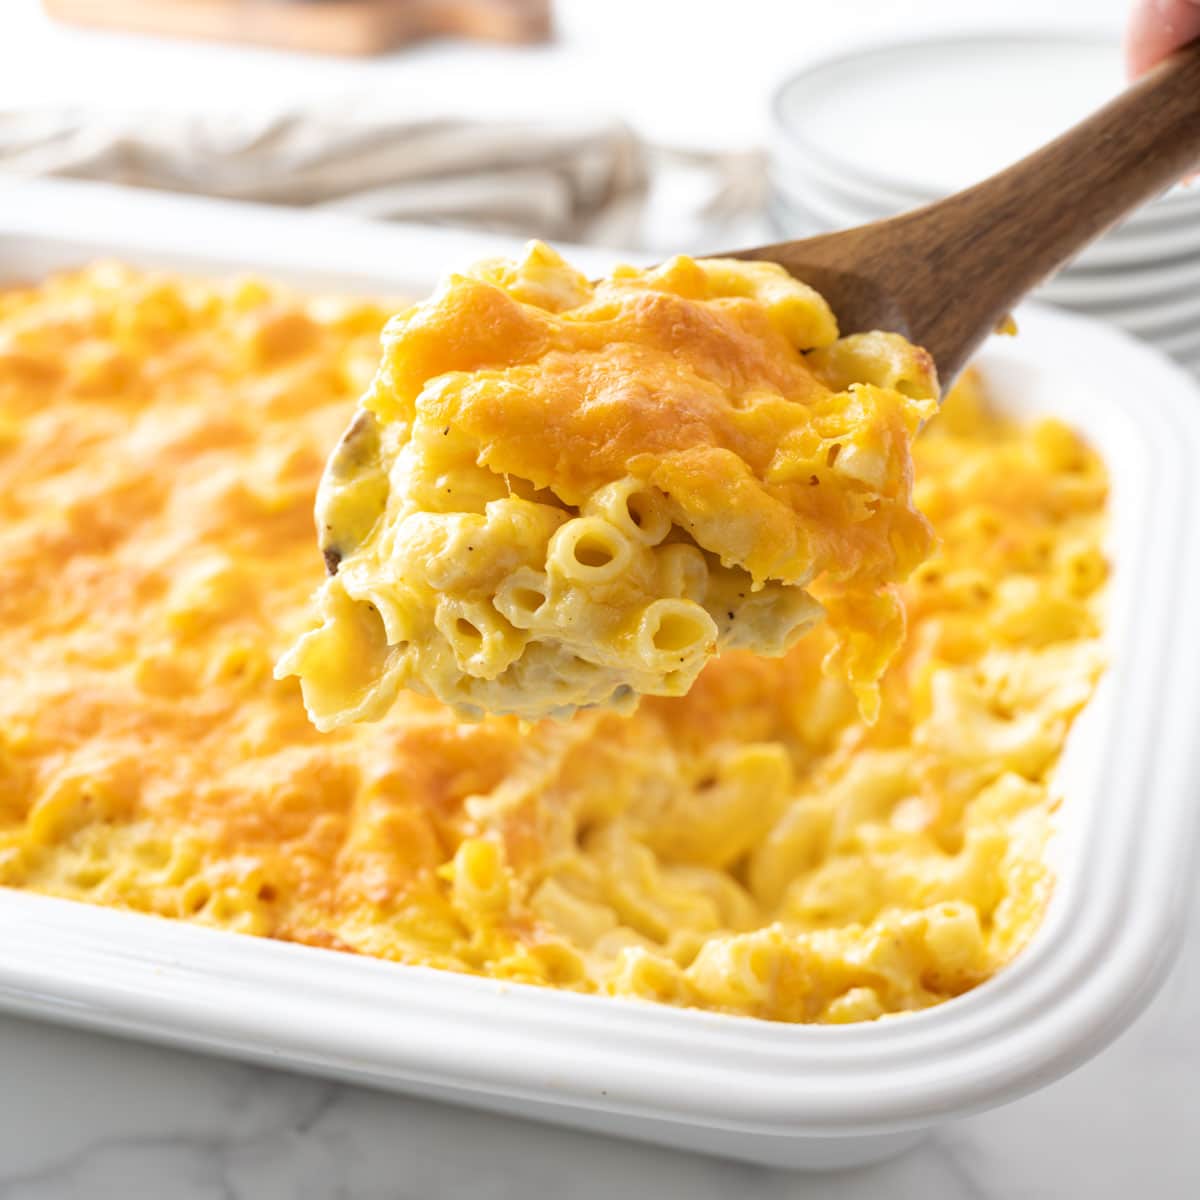 Removing a scoop of baked macaroni and cheese from a casserole dish.